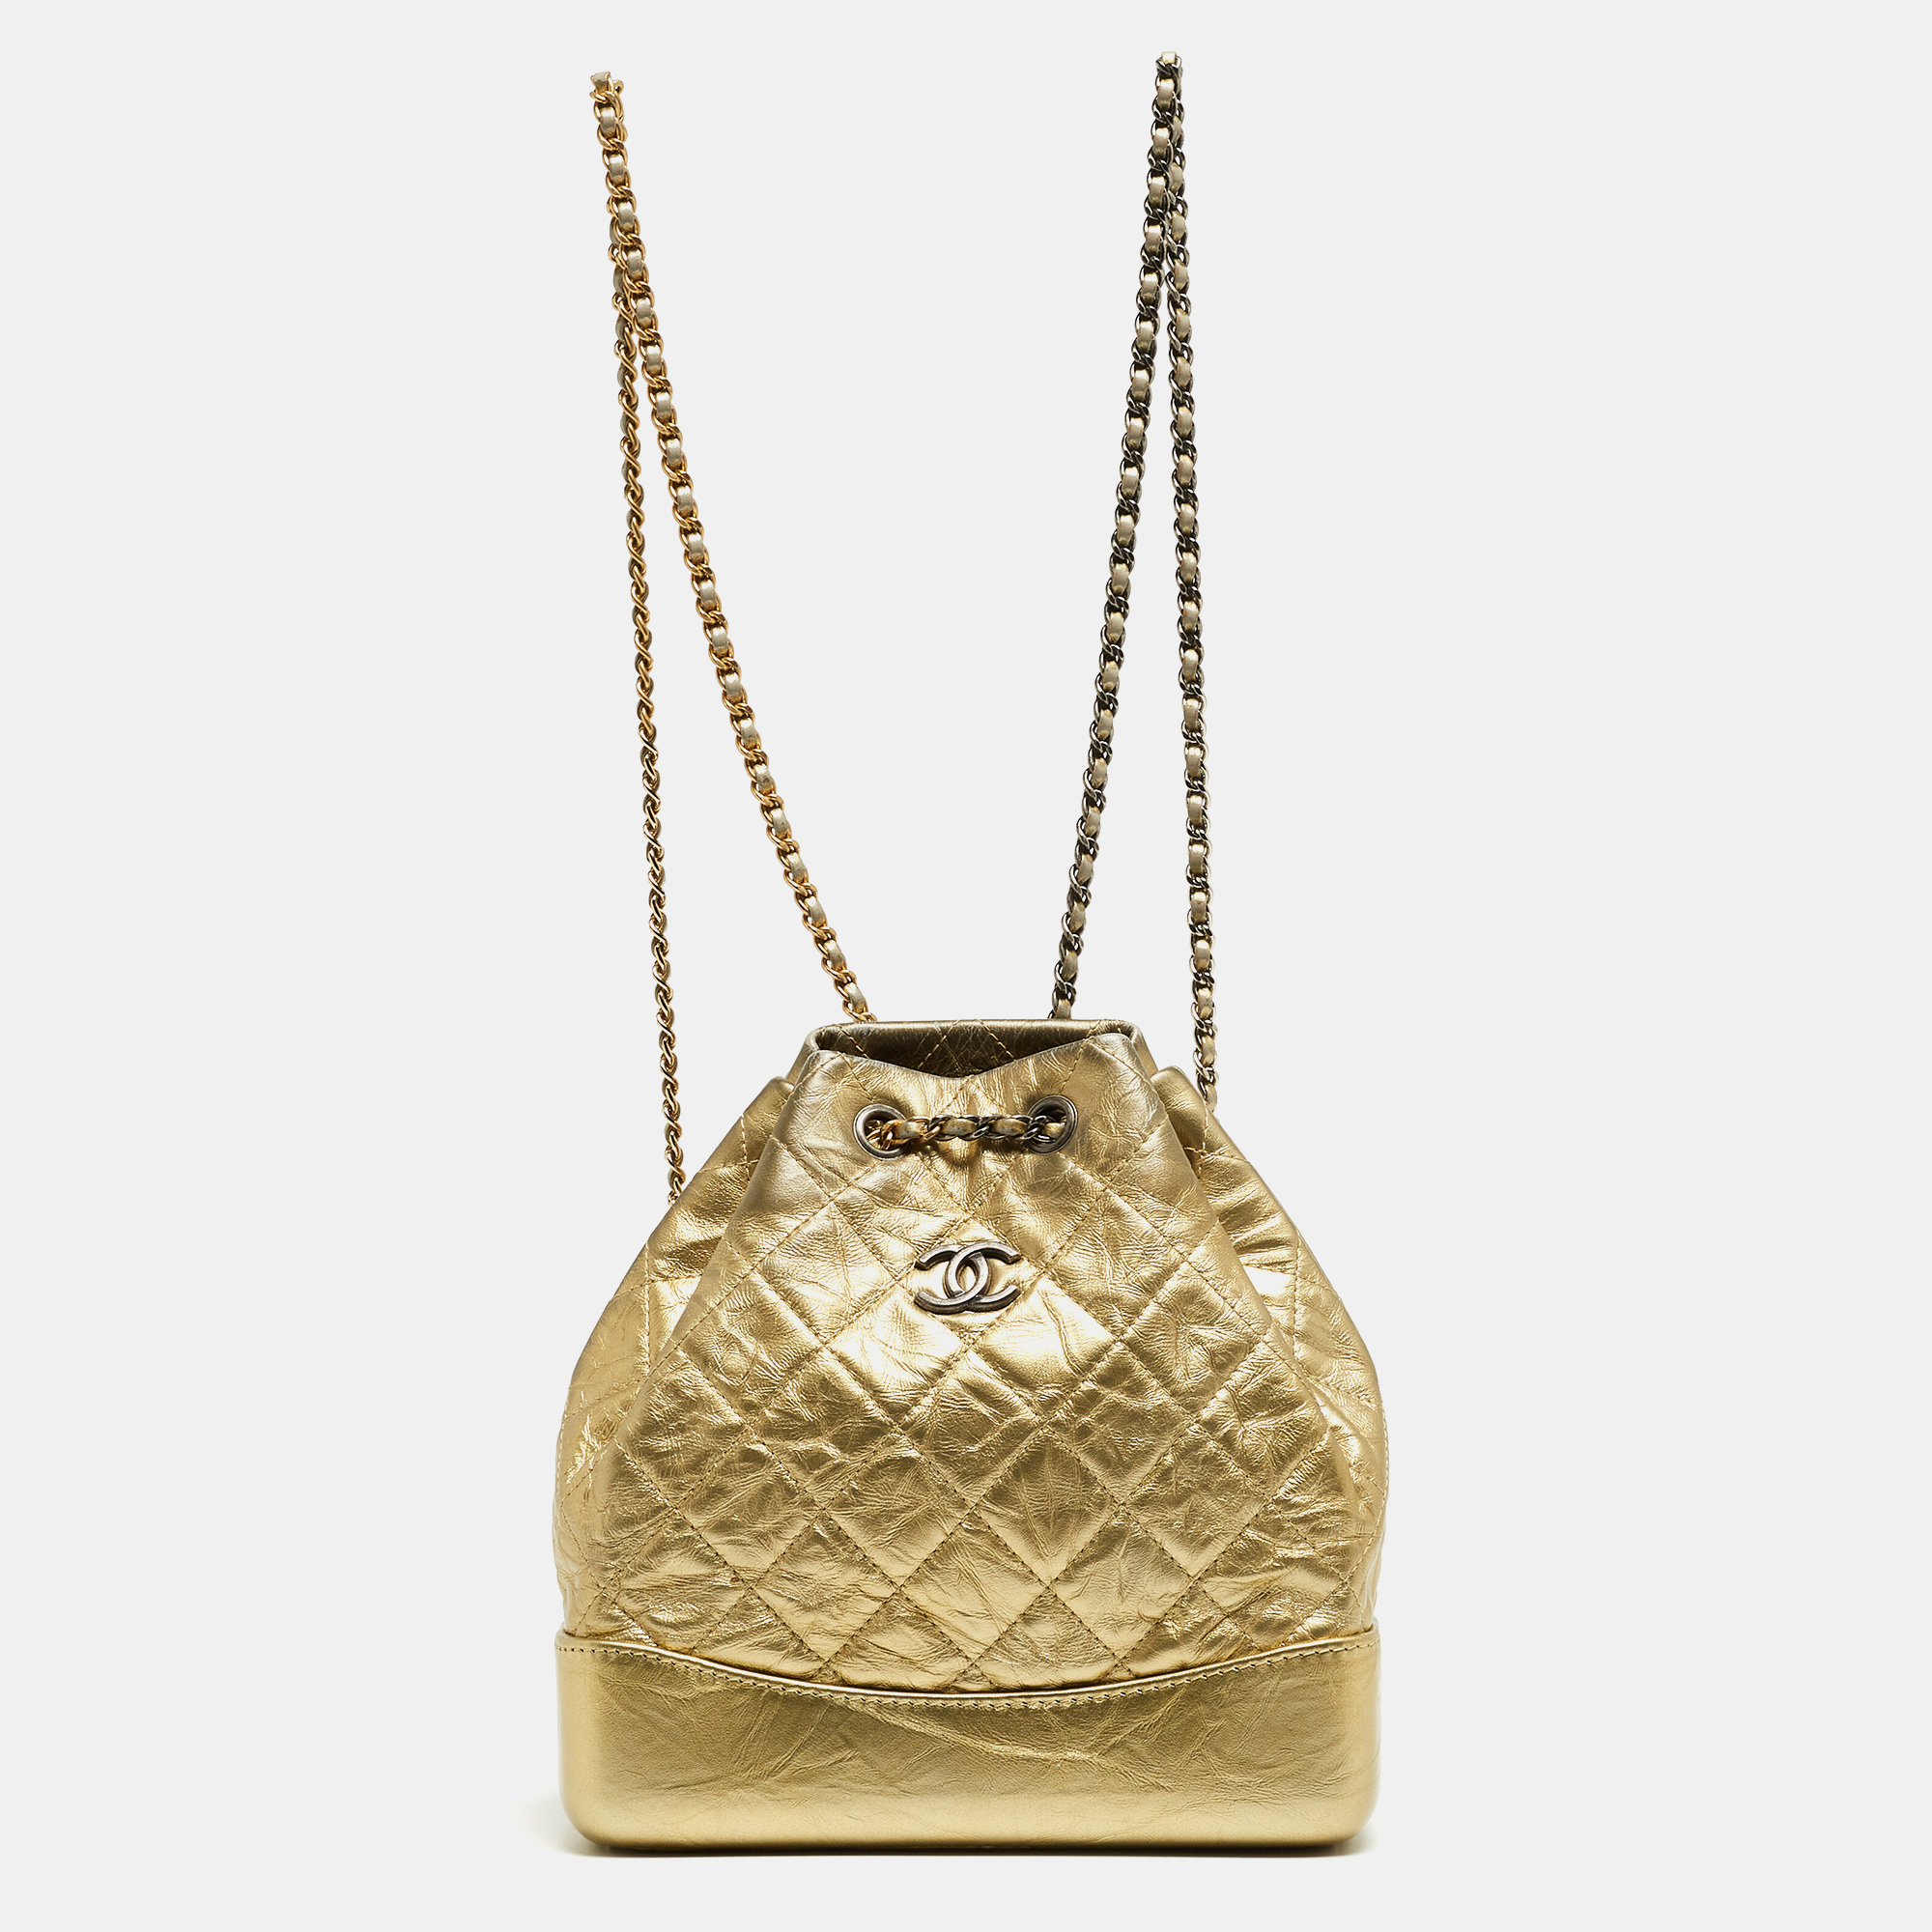 This Gabrielle backpack by Chanel boasts fabulous style and luxe details. It flaunts a gold leather exterior with a CC logo on the front and quilt detailing all over. The bag has a chain link which acts as shoulder straps and also secures the fabric interior. This gorgeous piece will bring you countless days of high style.